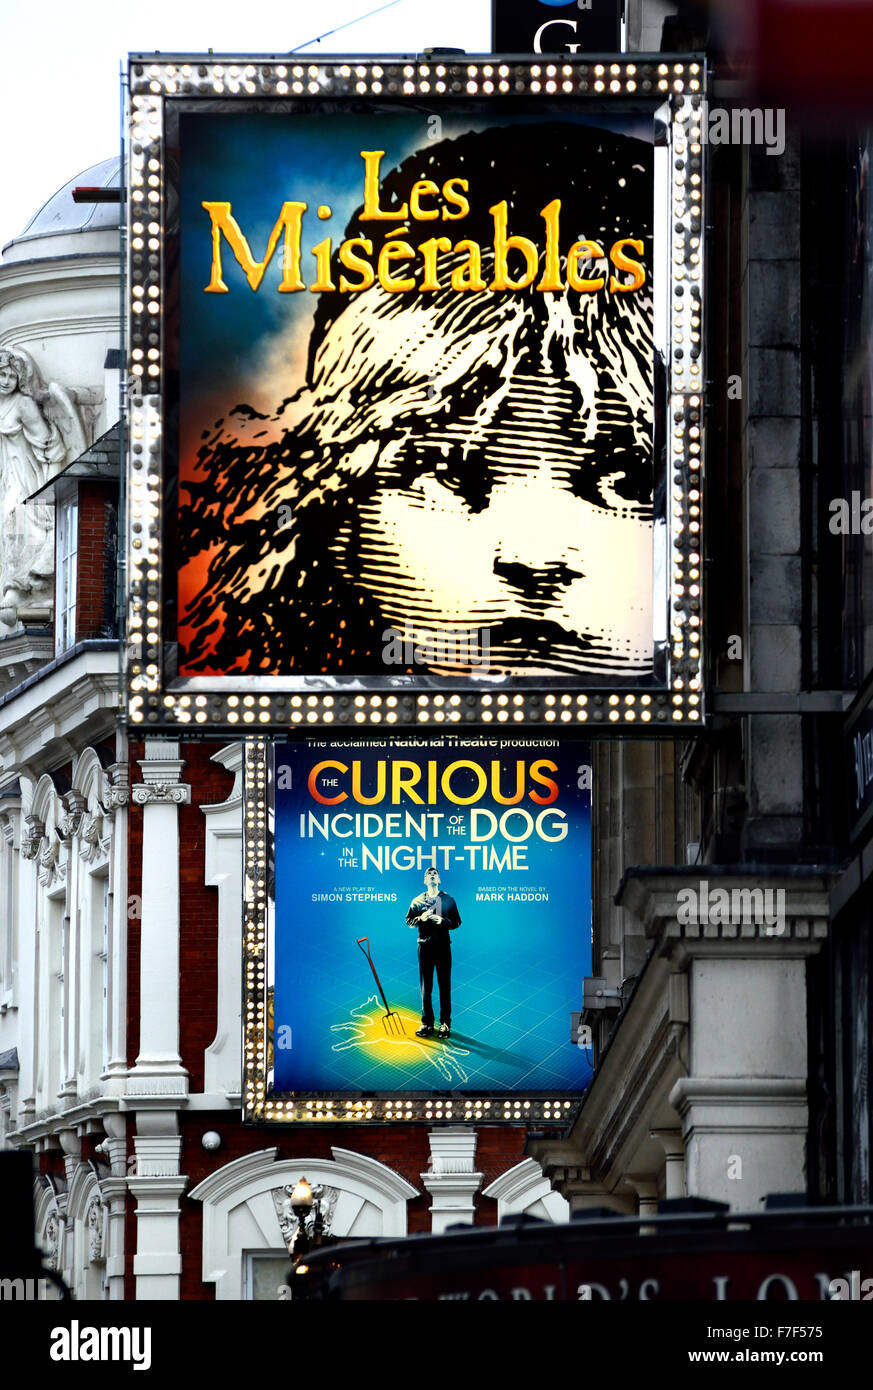 London, England, UK. Theatres on Shaftesbury Avenue - Les Miserables and The Curious Incident of the Dog In The Night-time Stock Photo